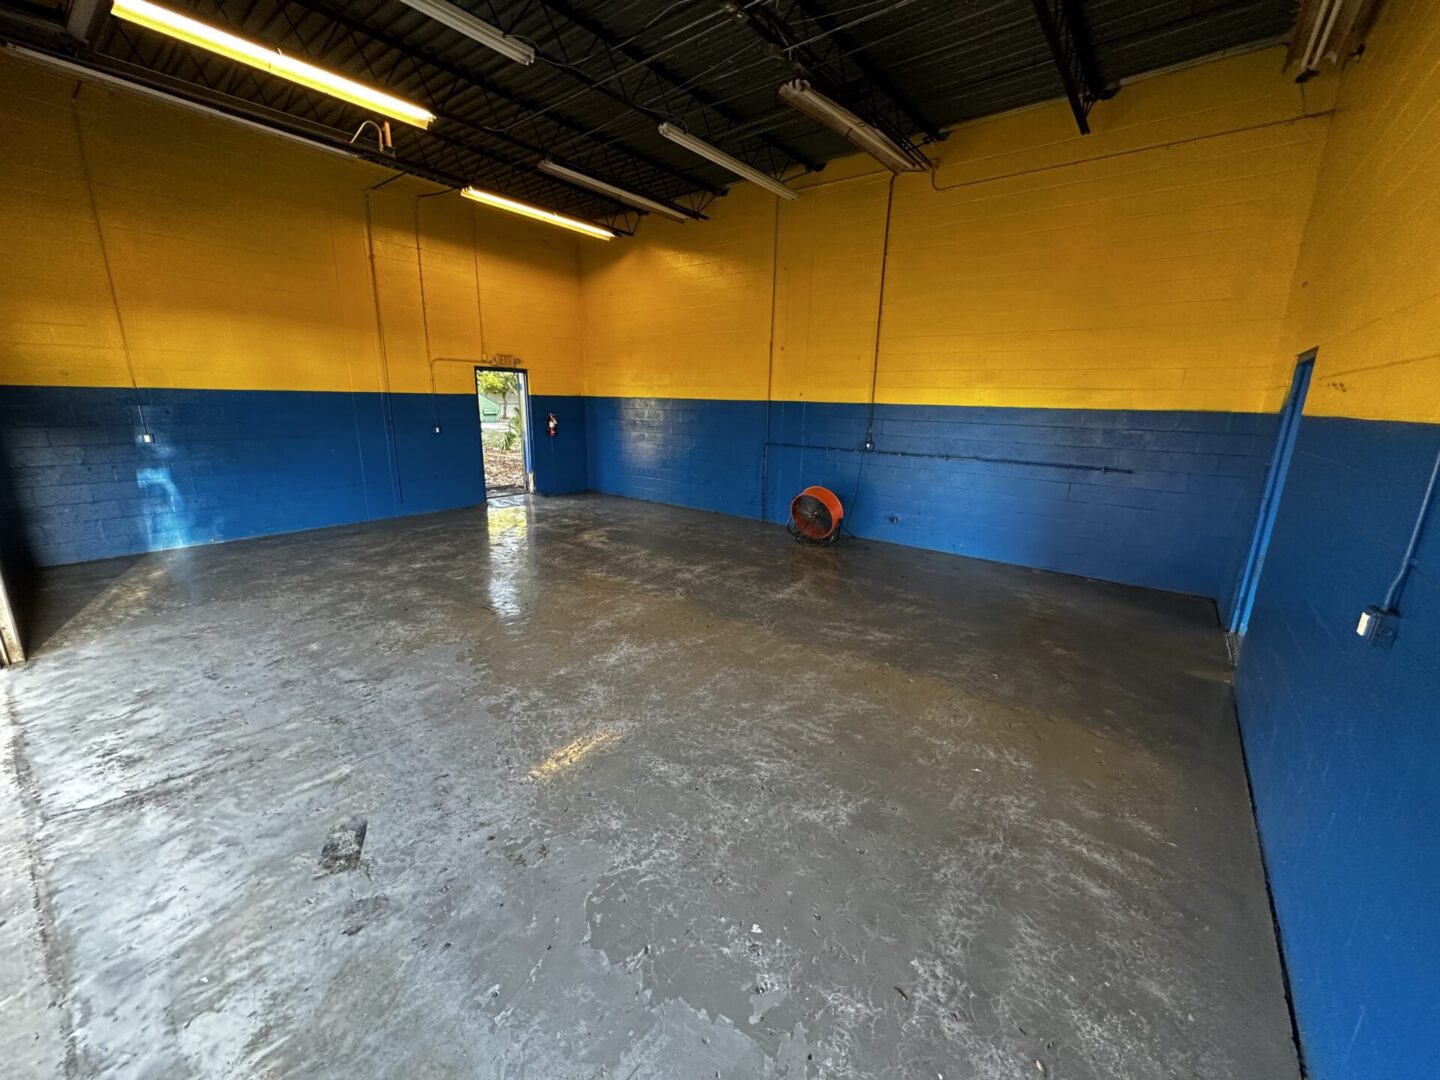 A room with blue and yellow walls and concrete floors.